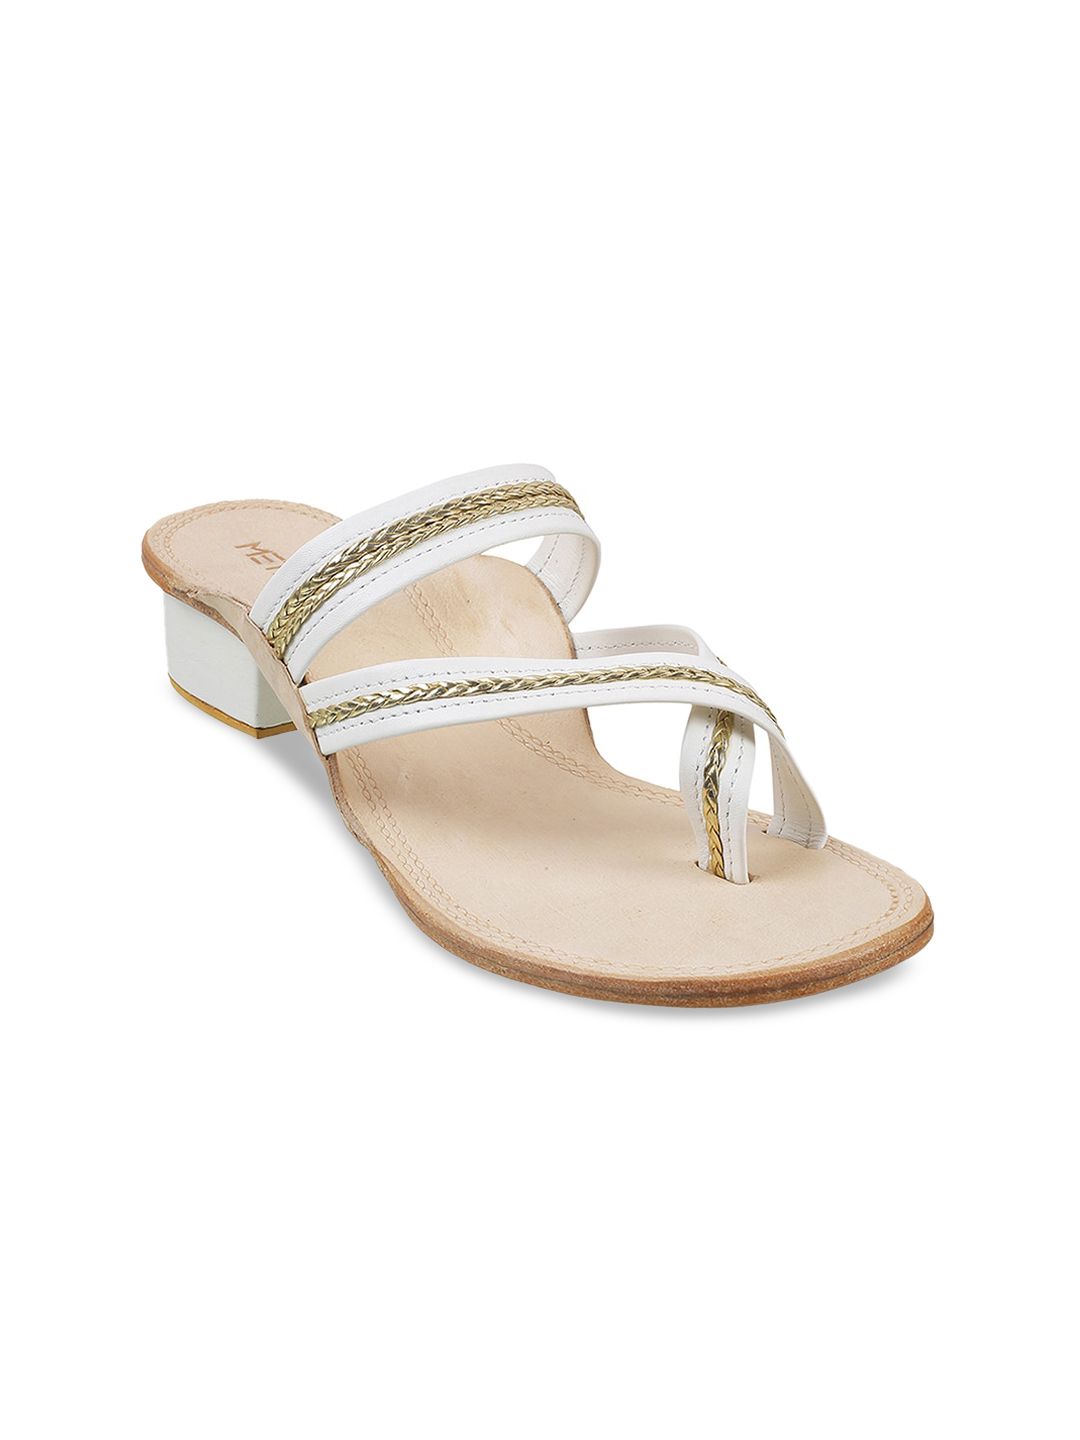 Metro White Embellished Suede Block Sandals Price in India